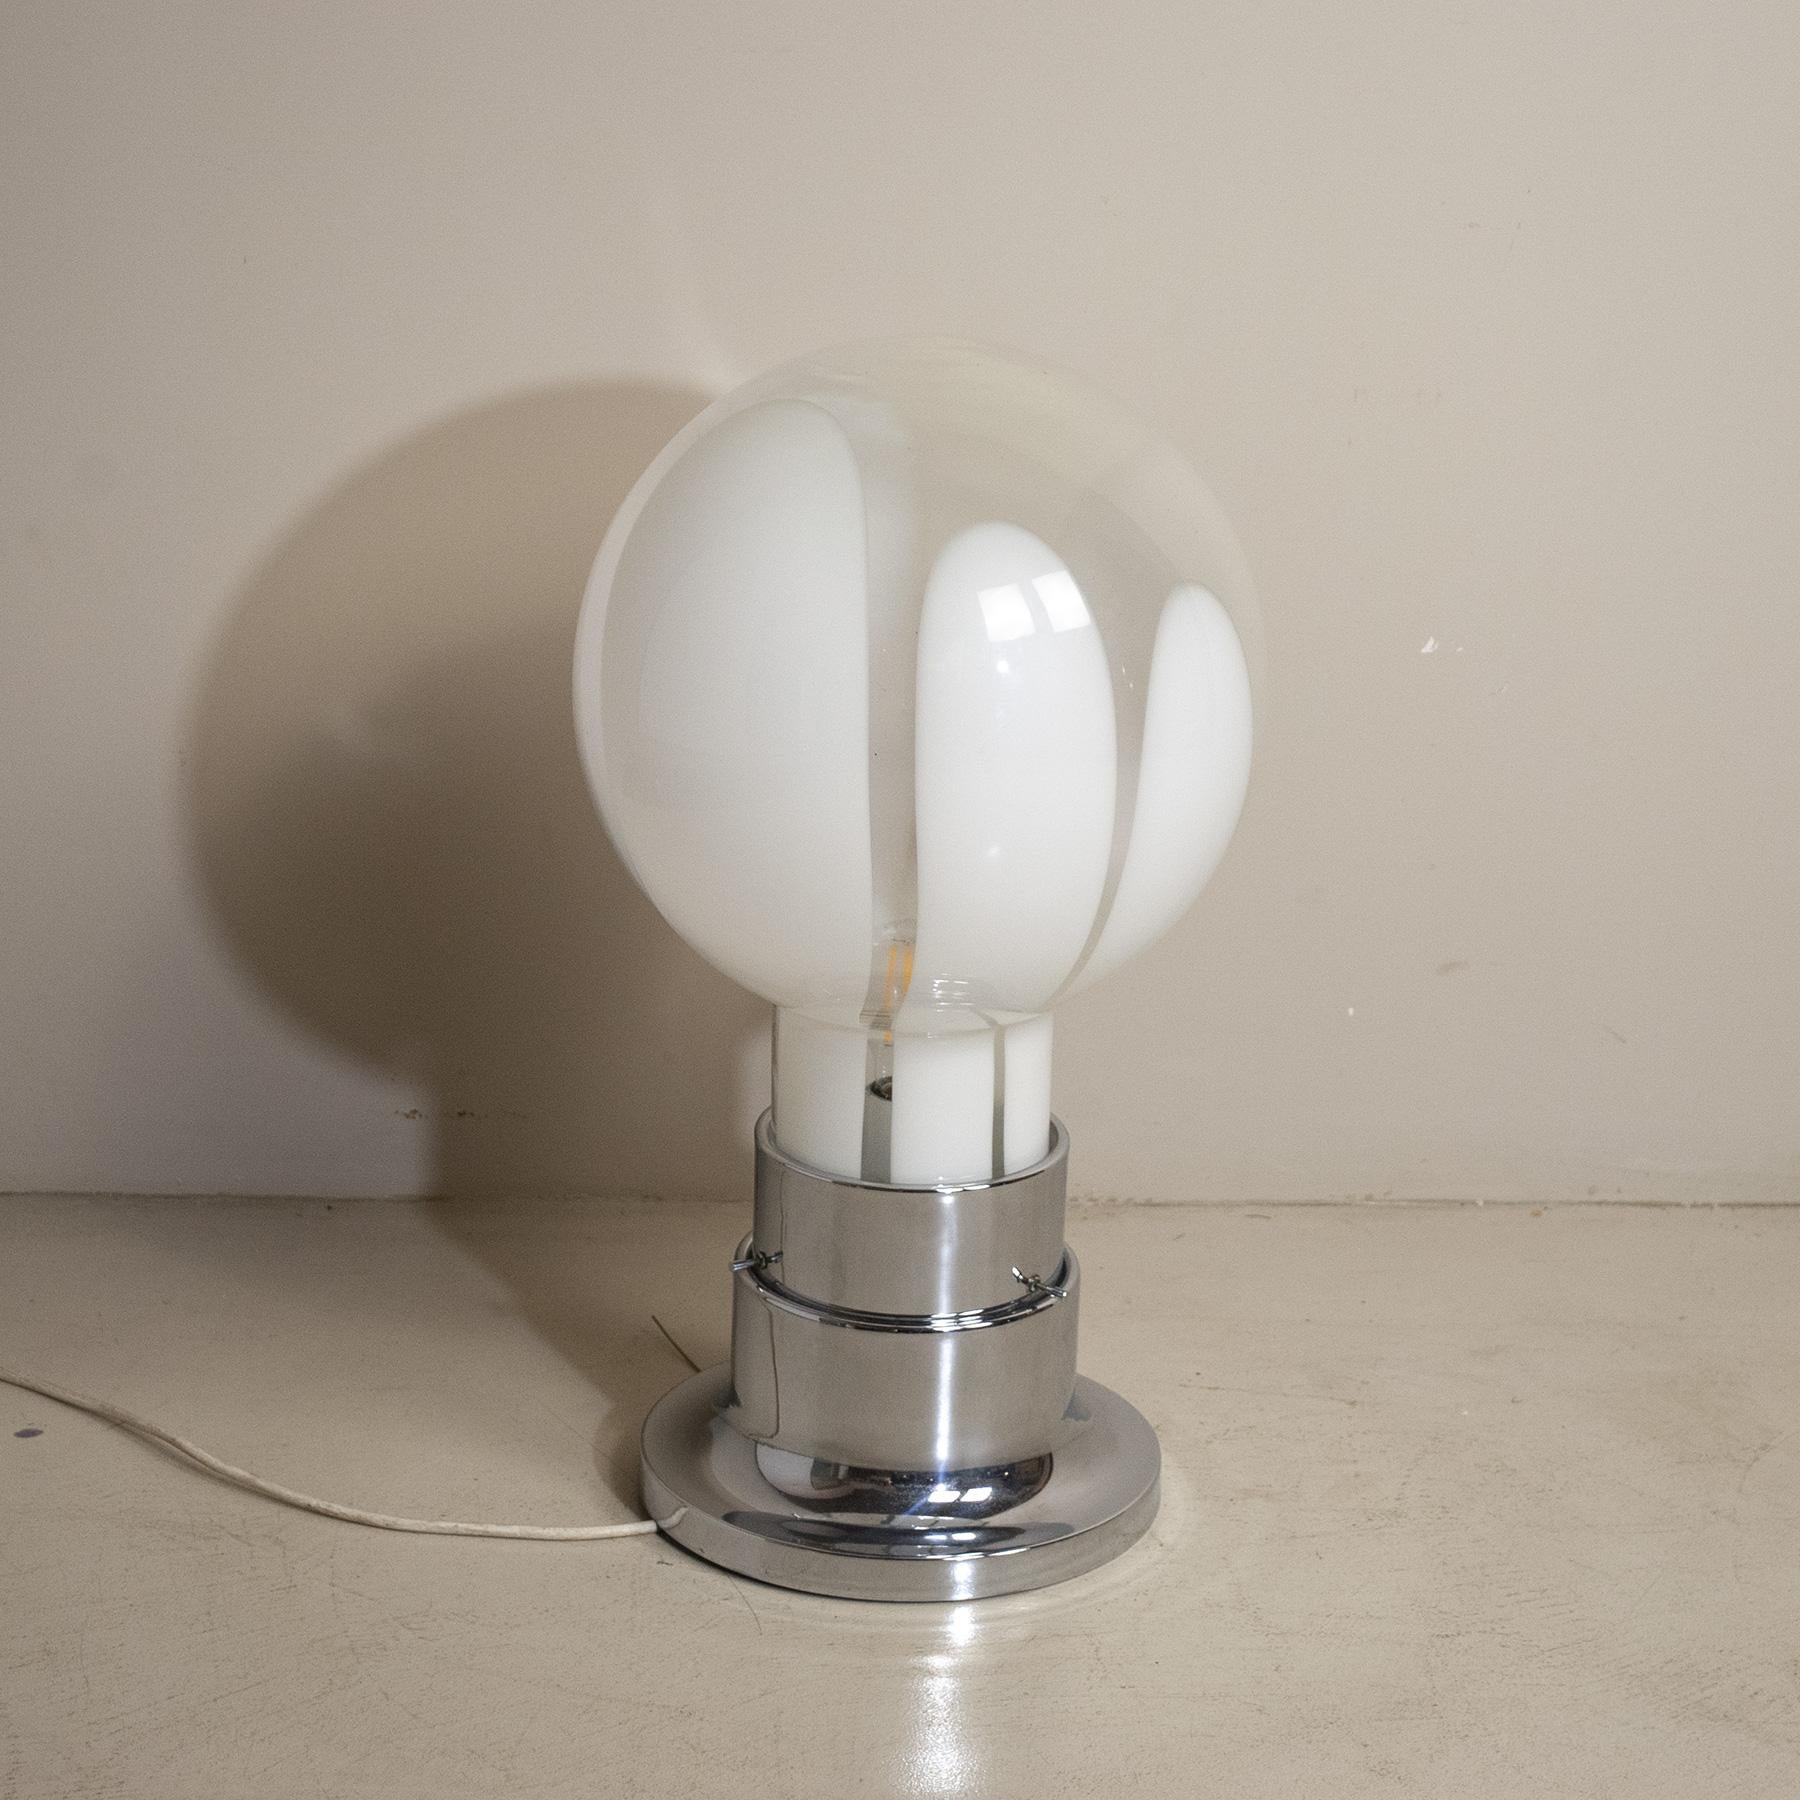 1970s table lamp with steel base and satin glass sphere by Mazzega.